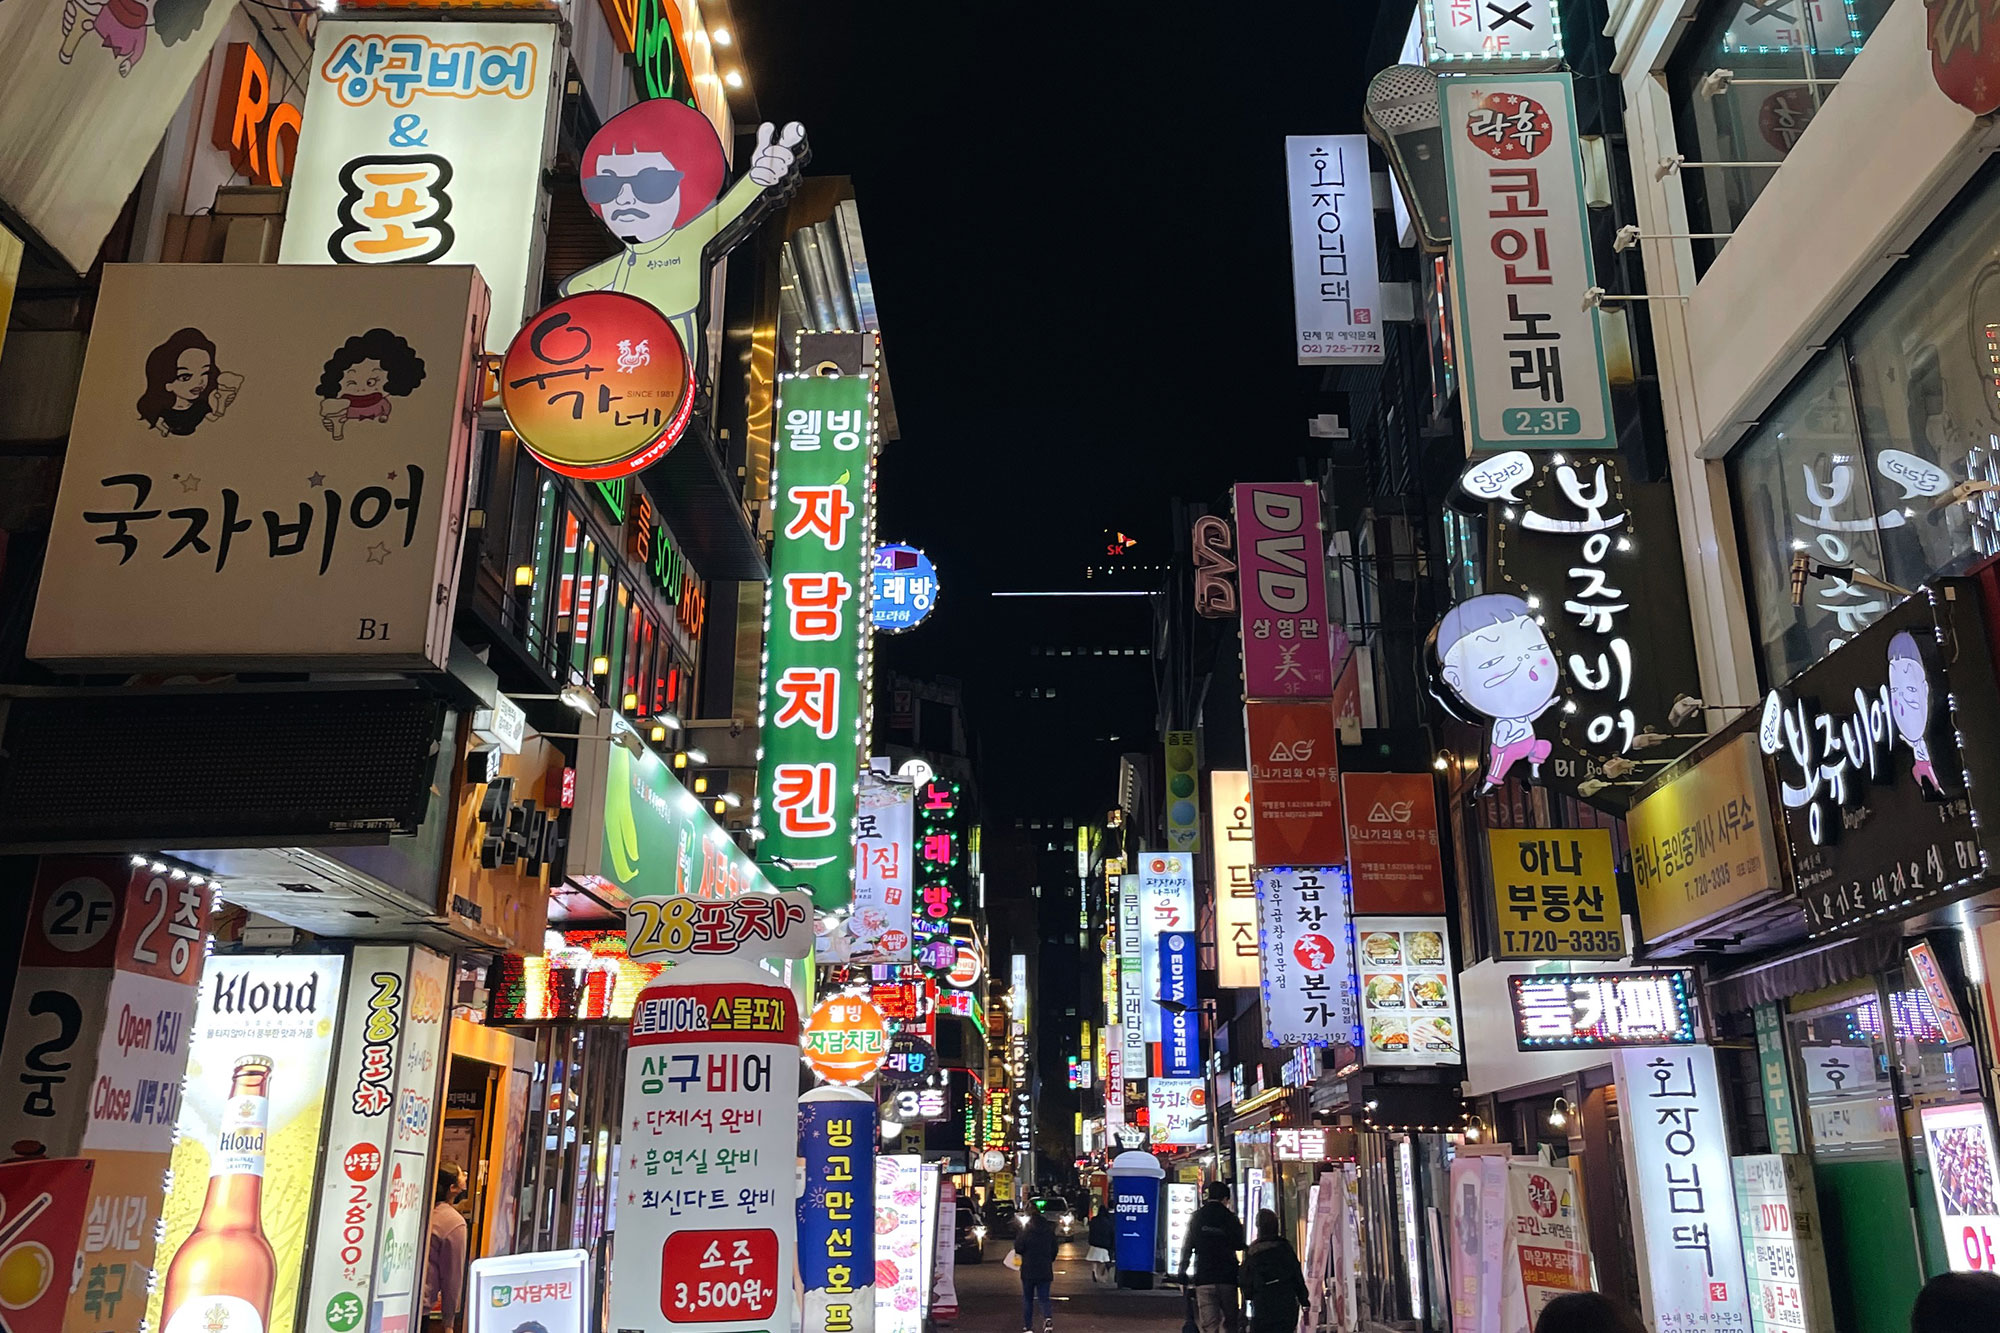 Nighttime view of downtown Seoul street, South Korean town lined with neon and lighted store and advertising signs